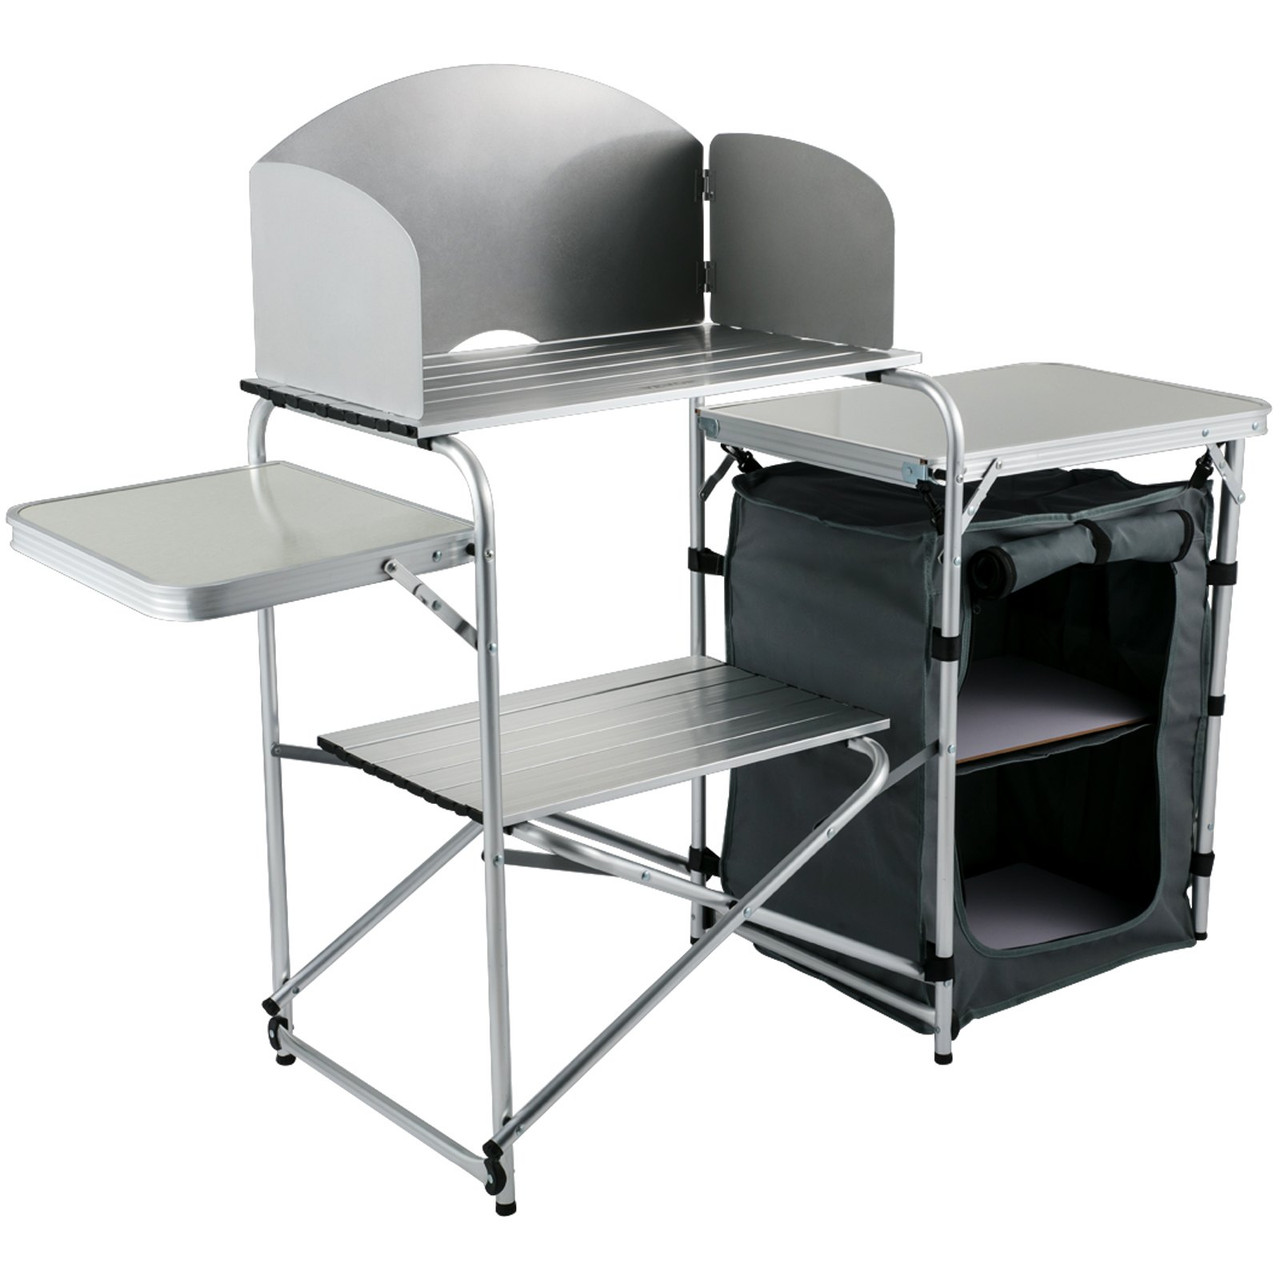 Aluminum Portable Folding Camp Station with Windshield, Storage Organizer & 4 Adjustable Feet Quick Installation for Outdoor Picnic Beach Party